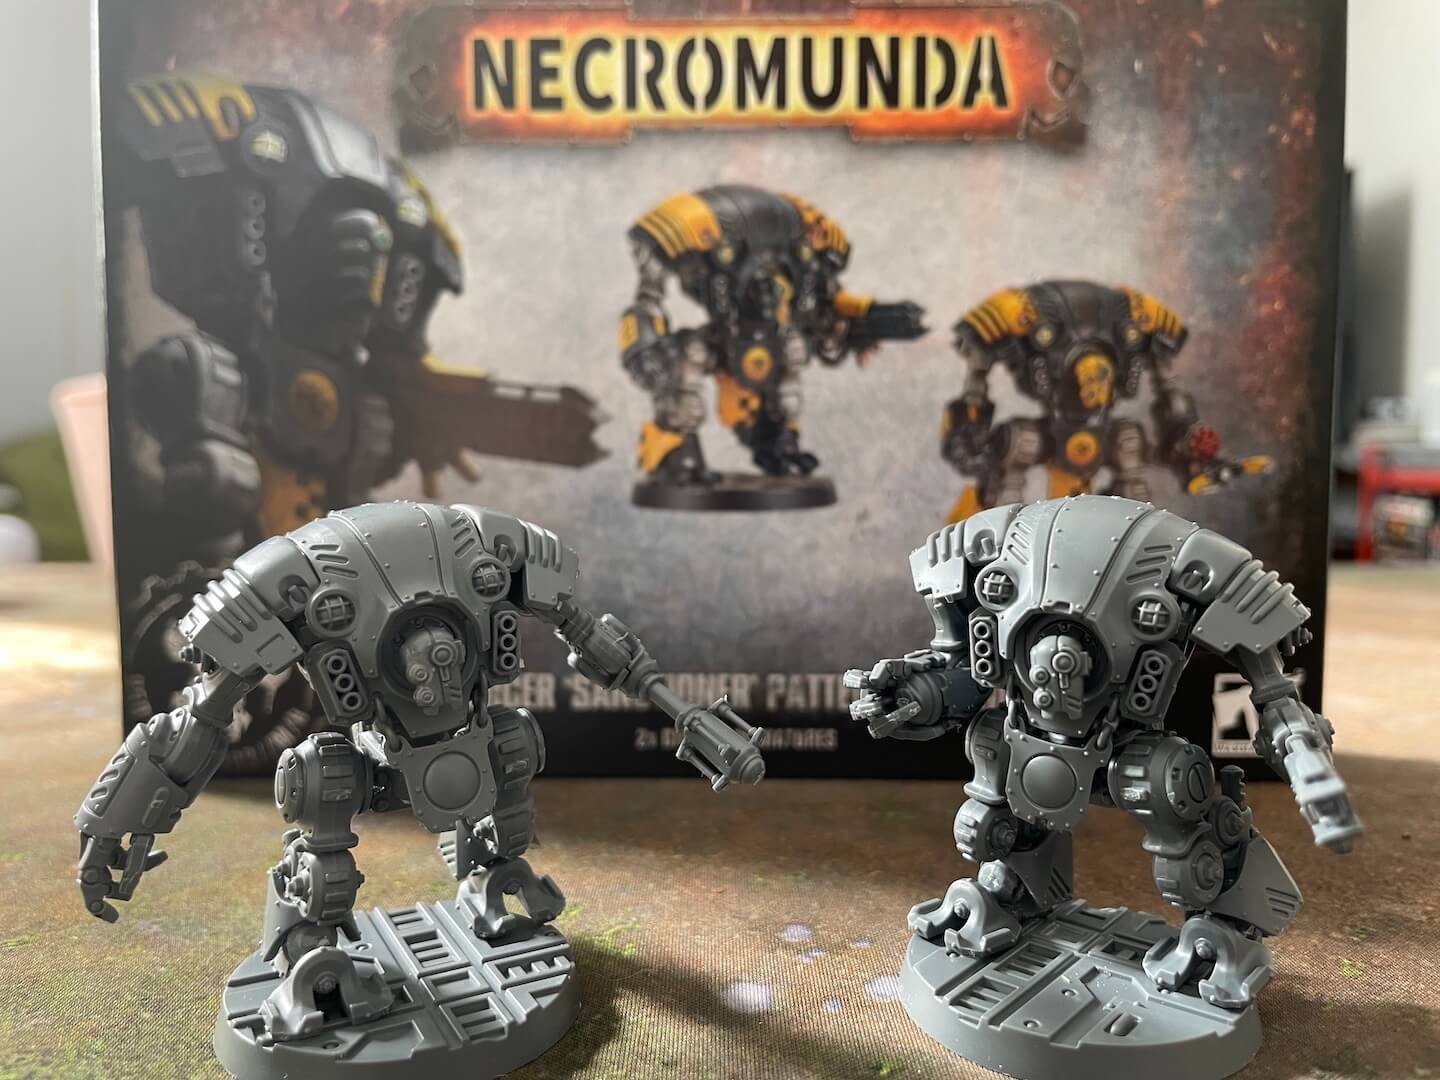 An image of built but unpainted Sanctioner Automata from the Games Workshop game Necromunda